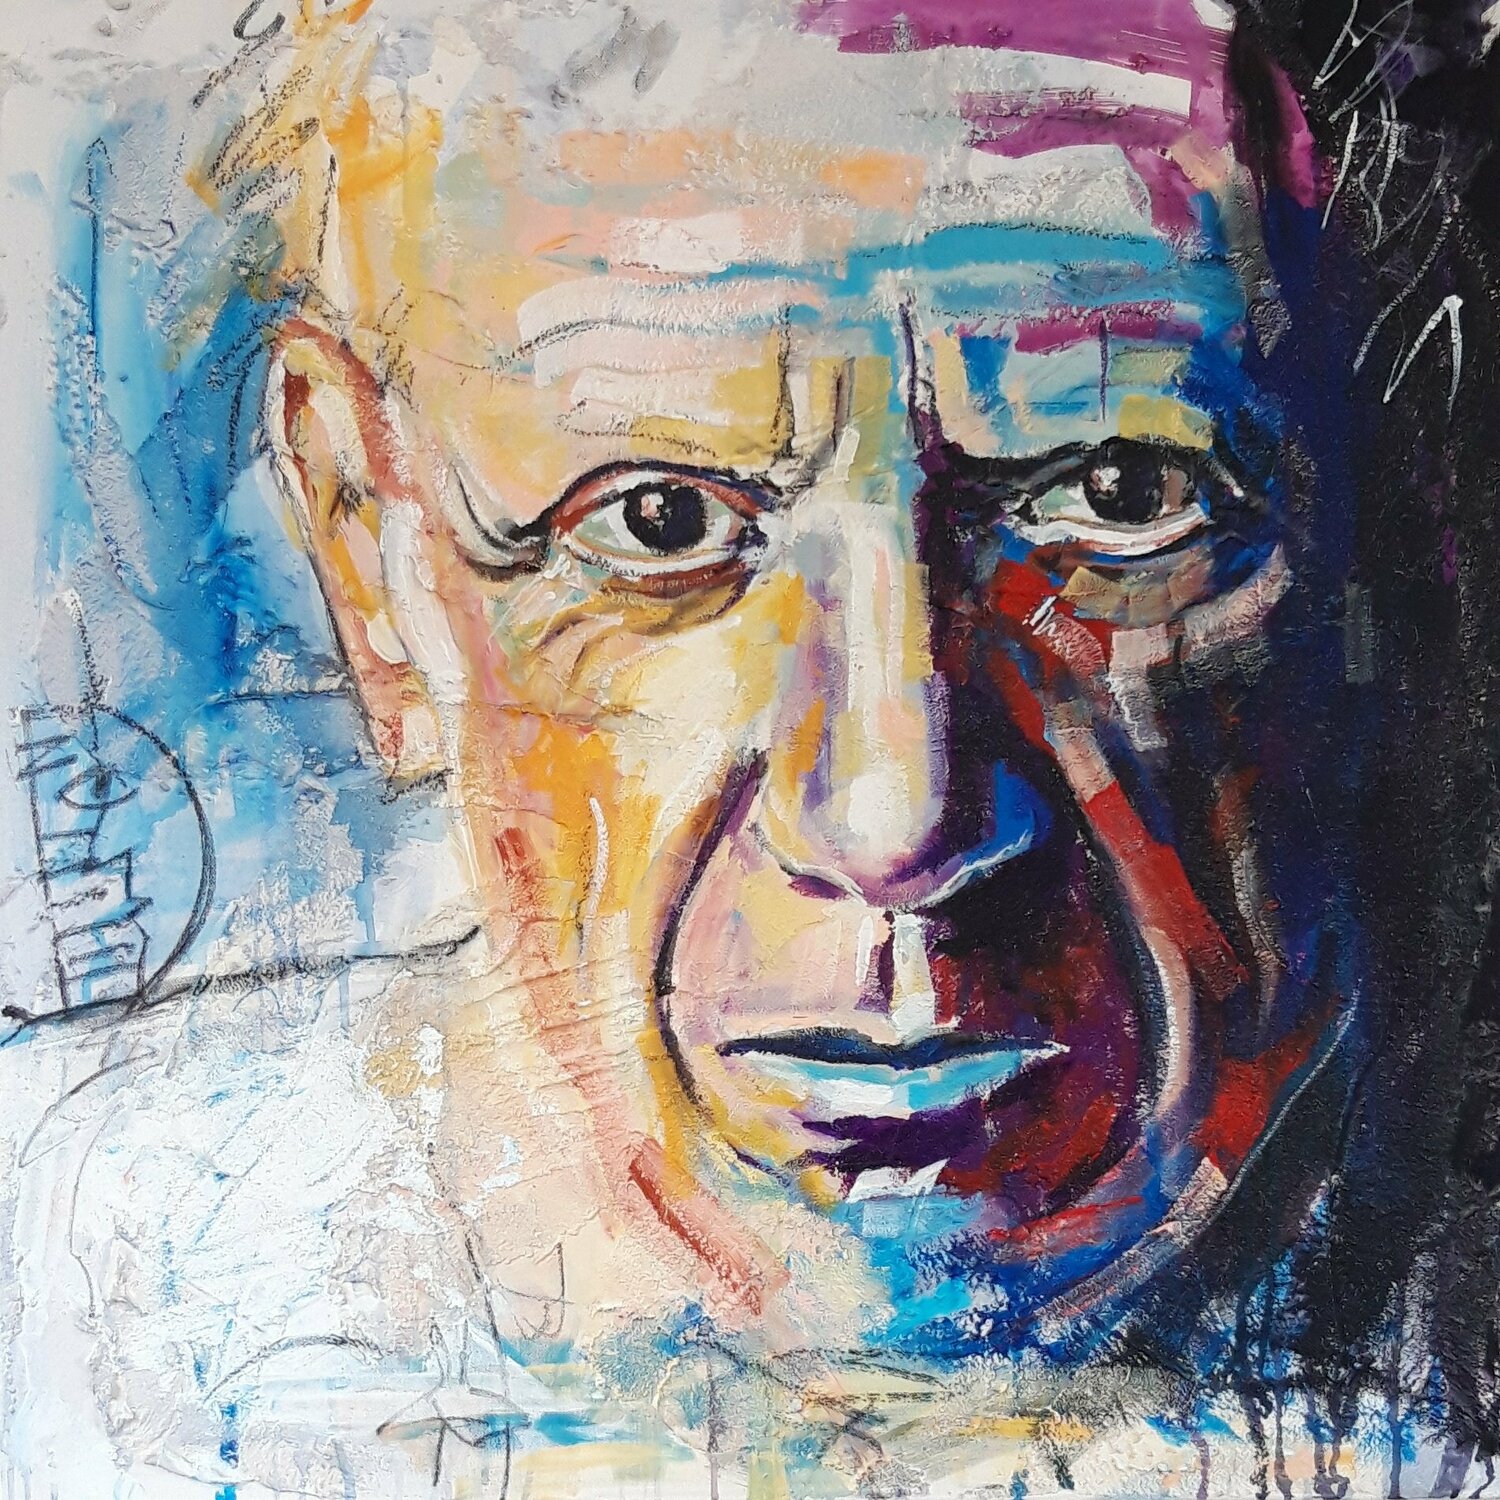 Pablo Picasso for Sale: Buy Artworks Inspired by Pablo Picasso - Singulart